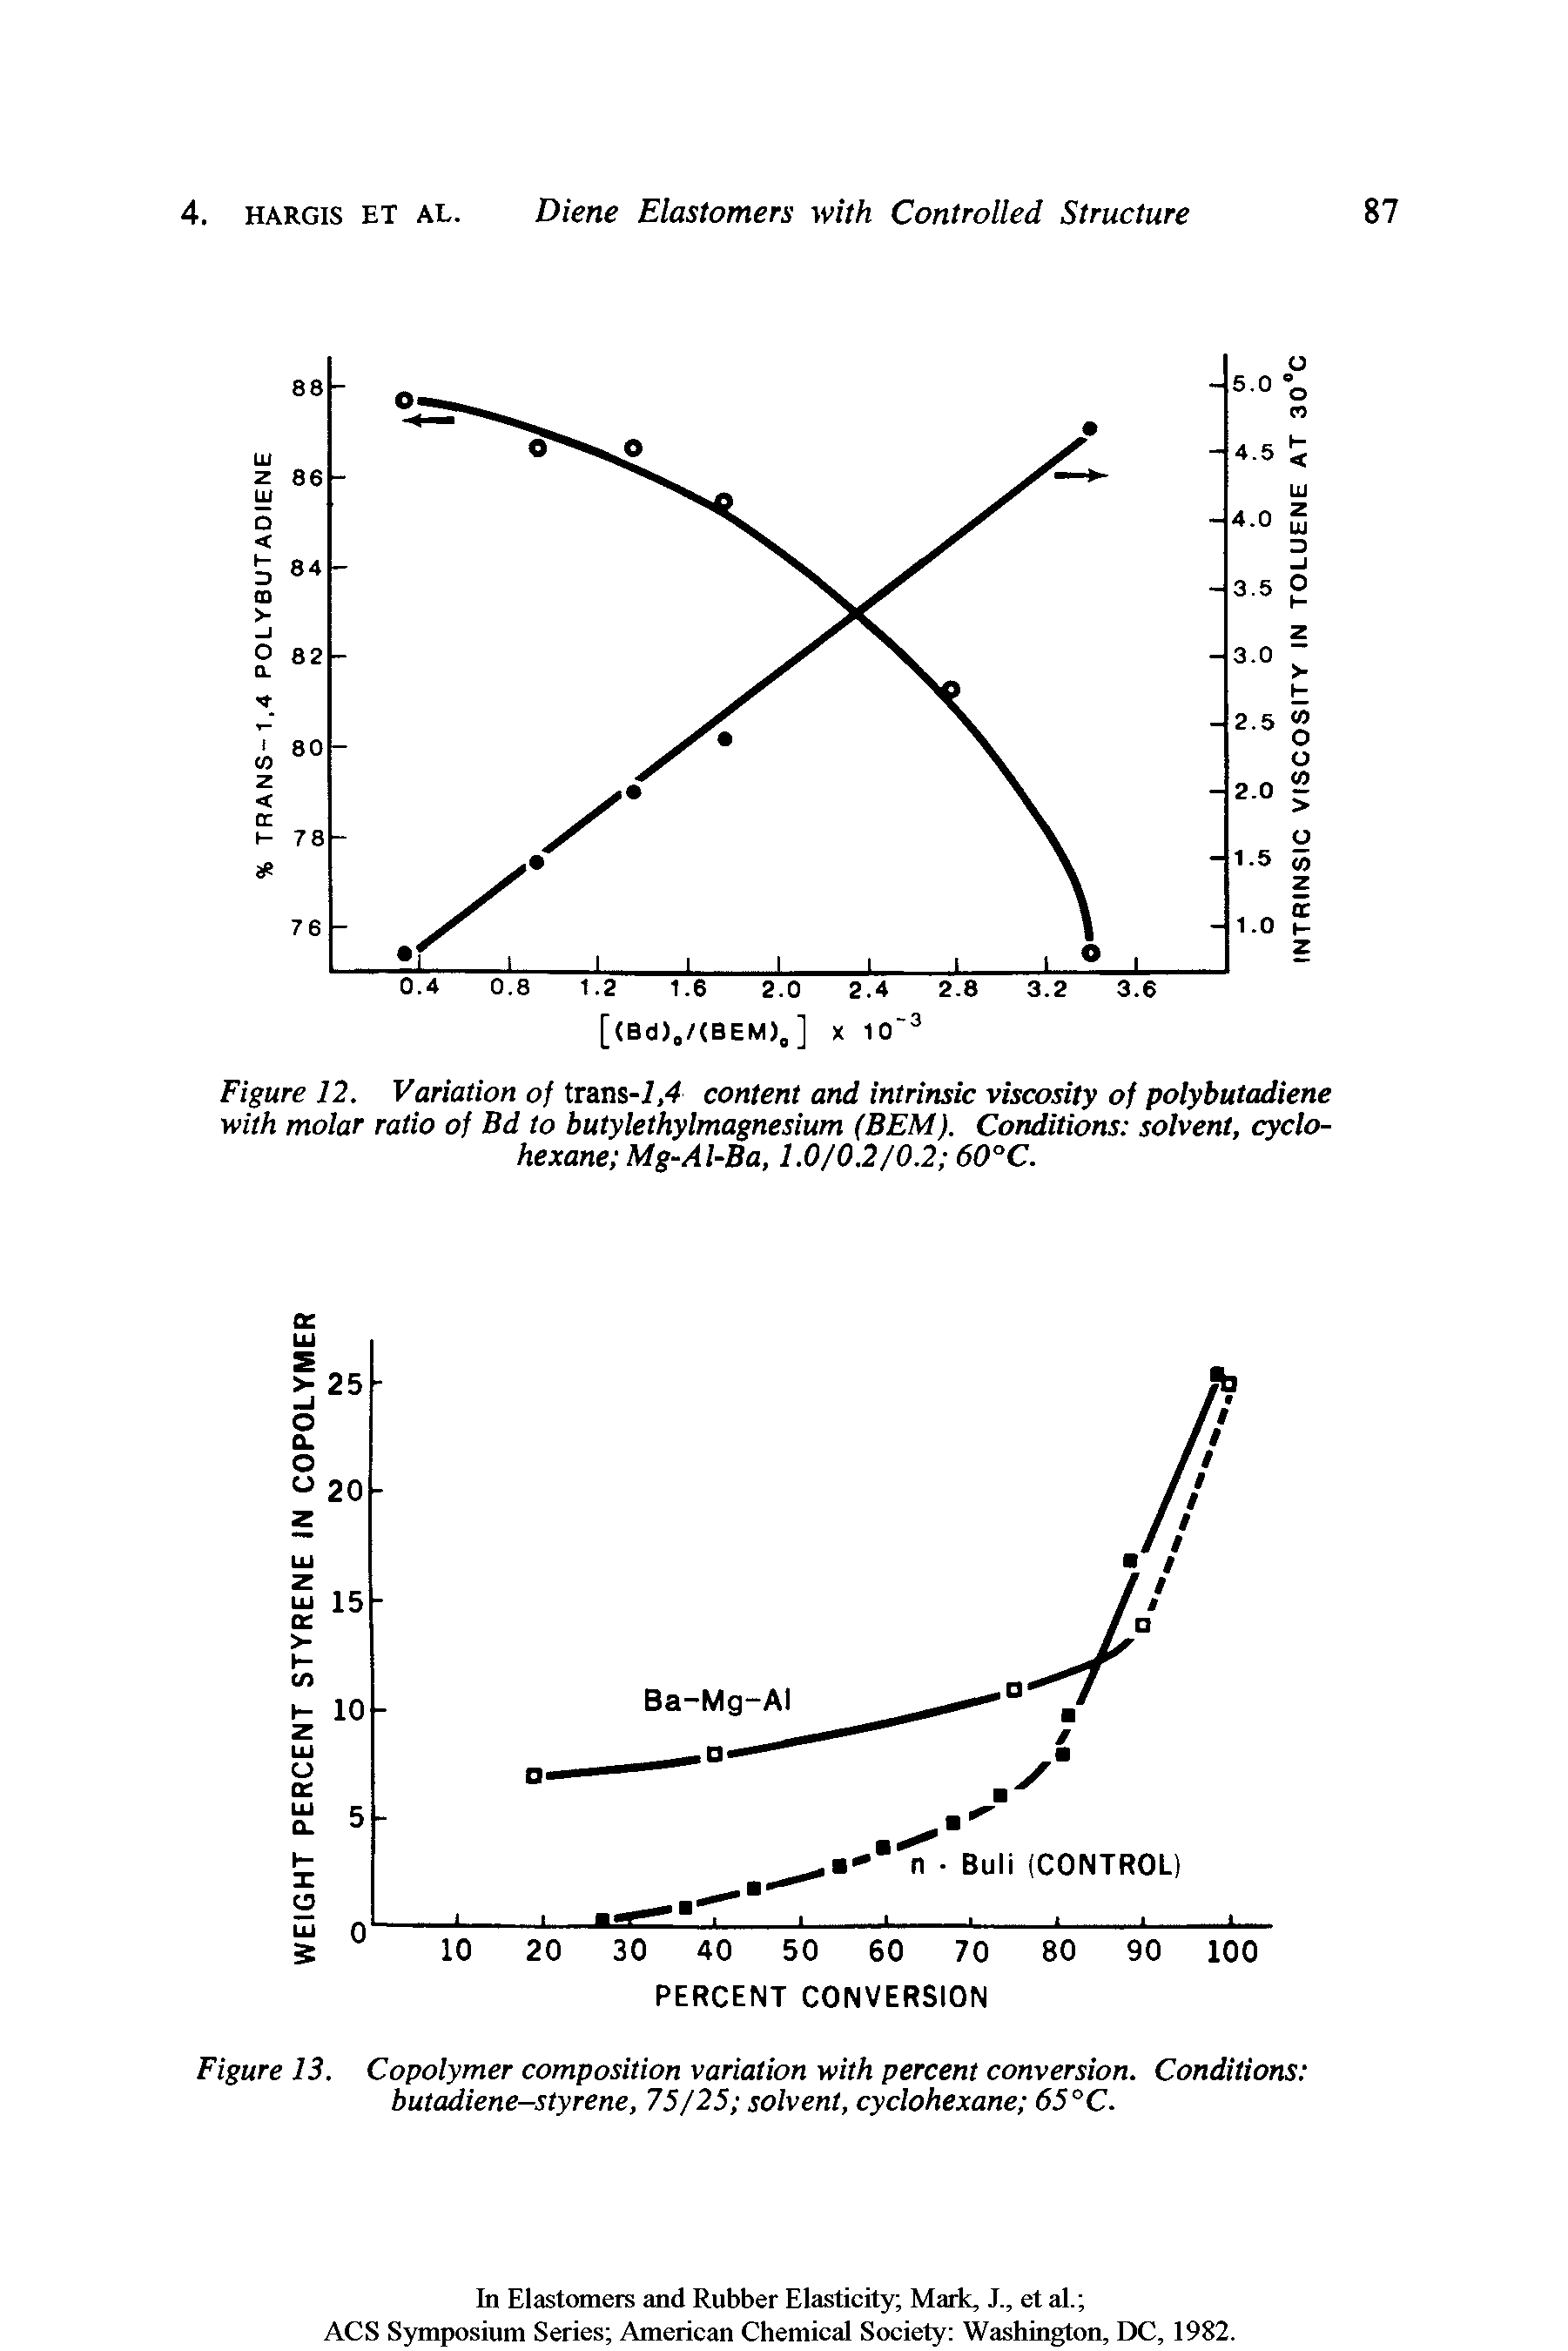 Figure 12. Variation of trans-i,4 content and intrinsic viscosity of polybutadiene with molar ratio of Bd to butylethylmagnesium (BEM). Conditions solvent, cyclohexane Mg-Al-Ba, 1.0/0.2/0.2 60°C.